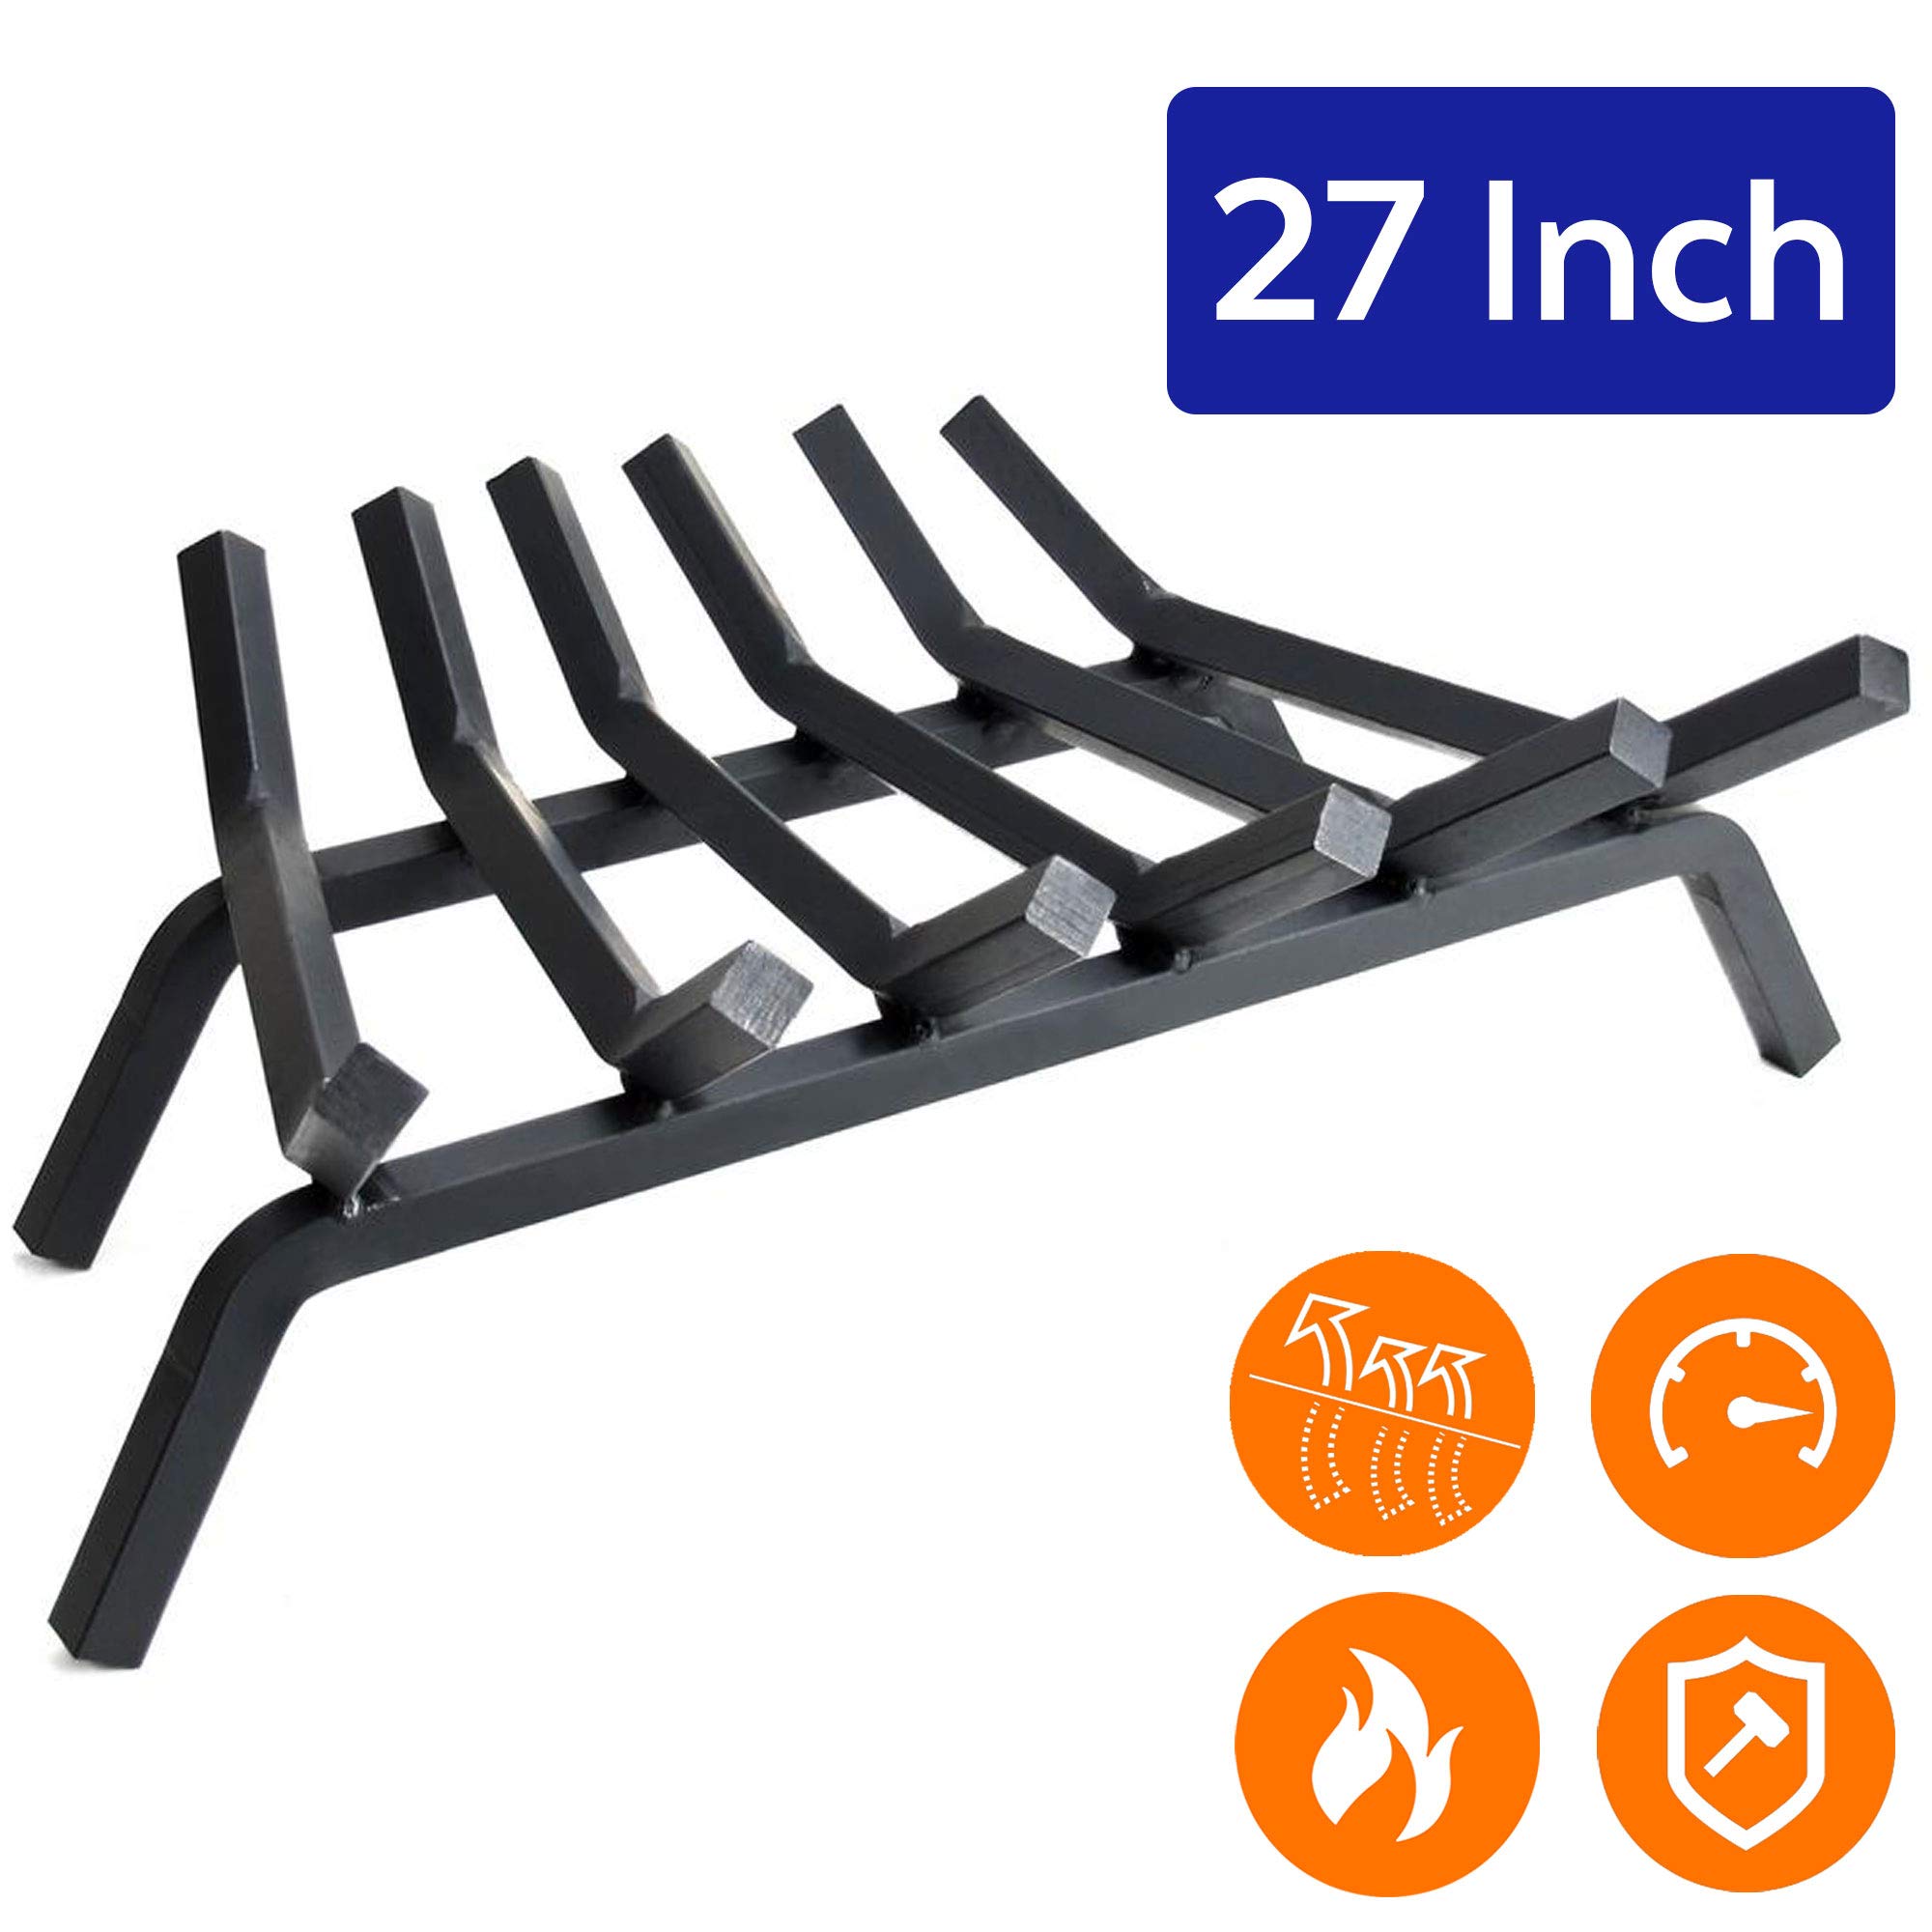 INNFINEST Fireplace Log Grate 30 inch 7 Bar Fire Grates Heavy Duty 3/4” Wide Solid Steel Indoor Chimney Hearth Outdoor Fire Place Kindling Tool Pit Wrought Iron Wood Stove Firewood Burning Rack Holder